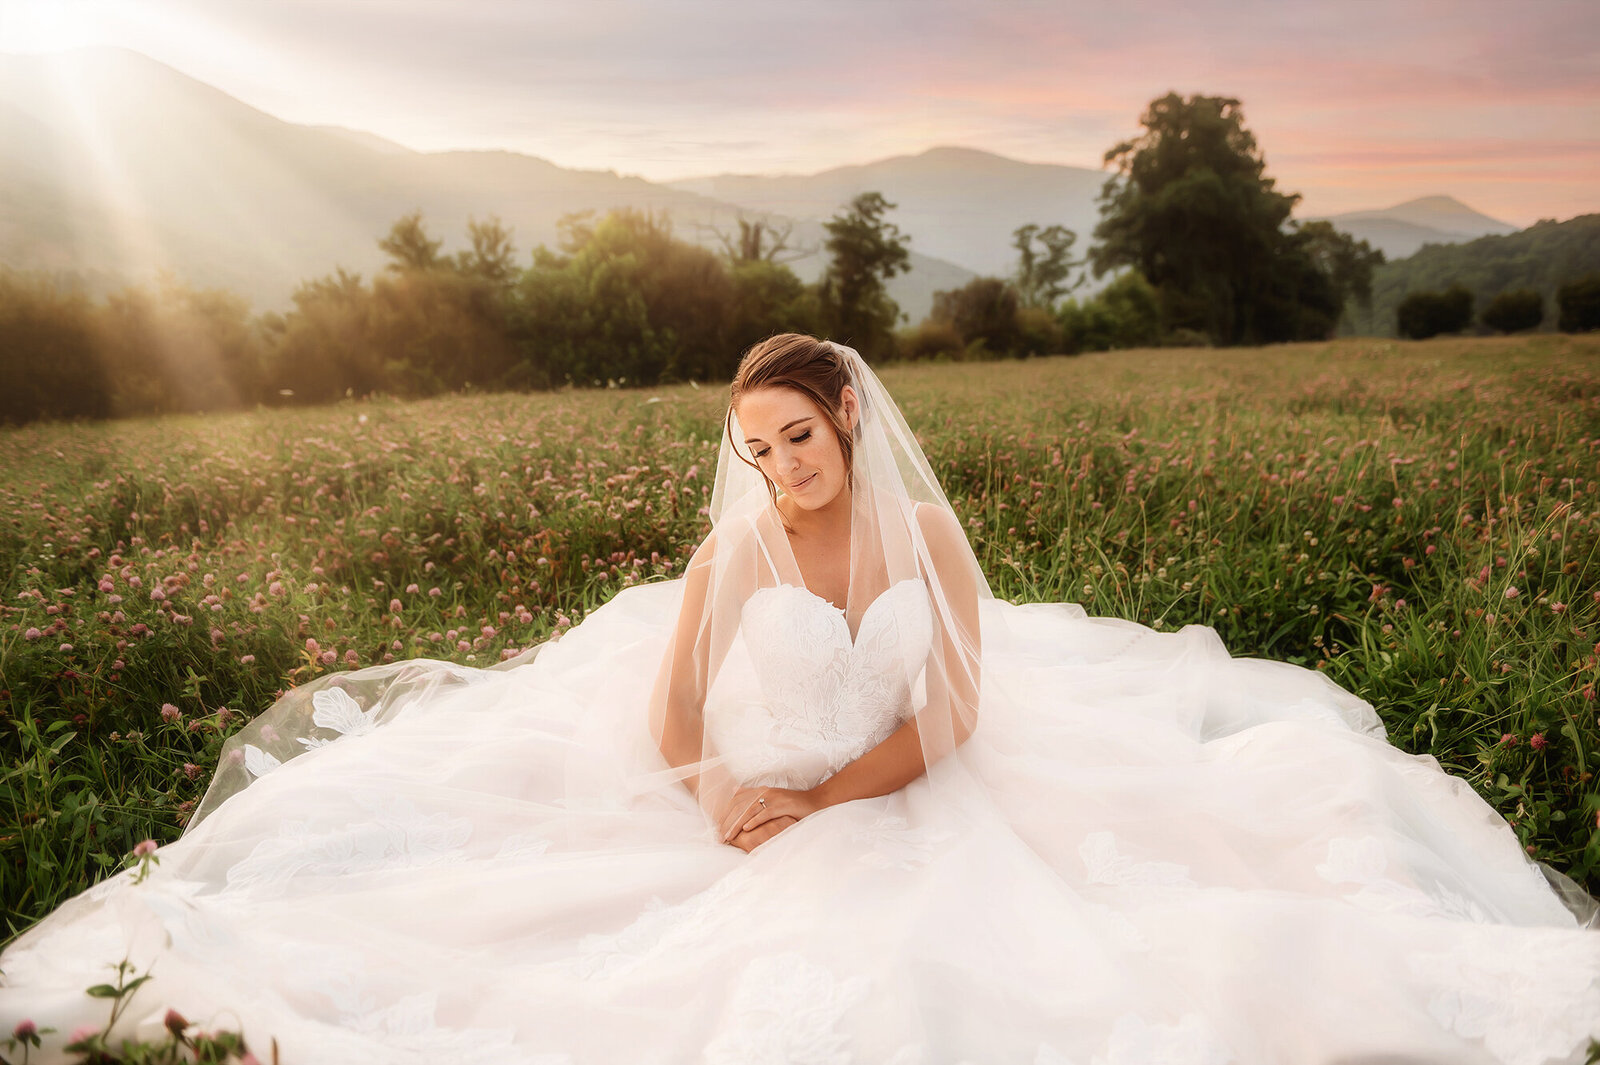 Beautiful Bride poses for Bridal Portraits in a field of wildflowers in Asheville, NC.